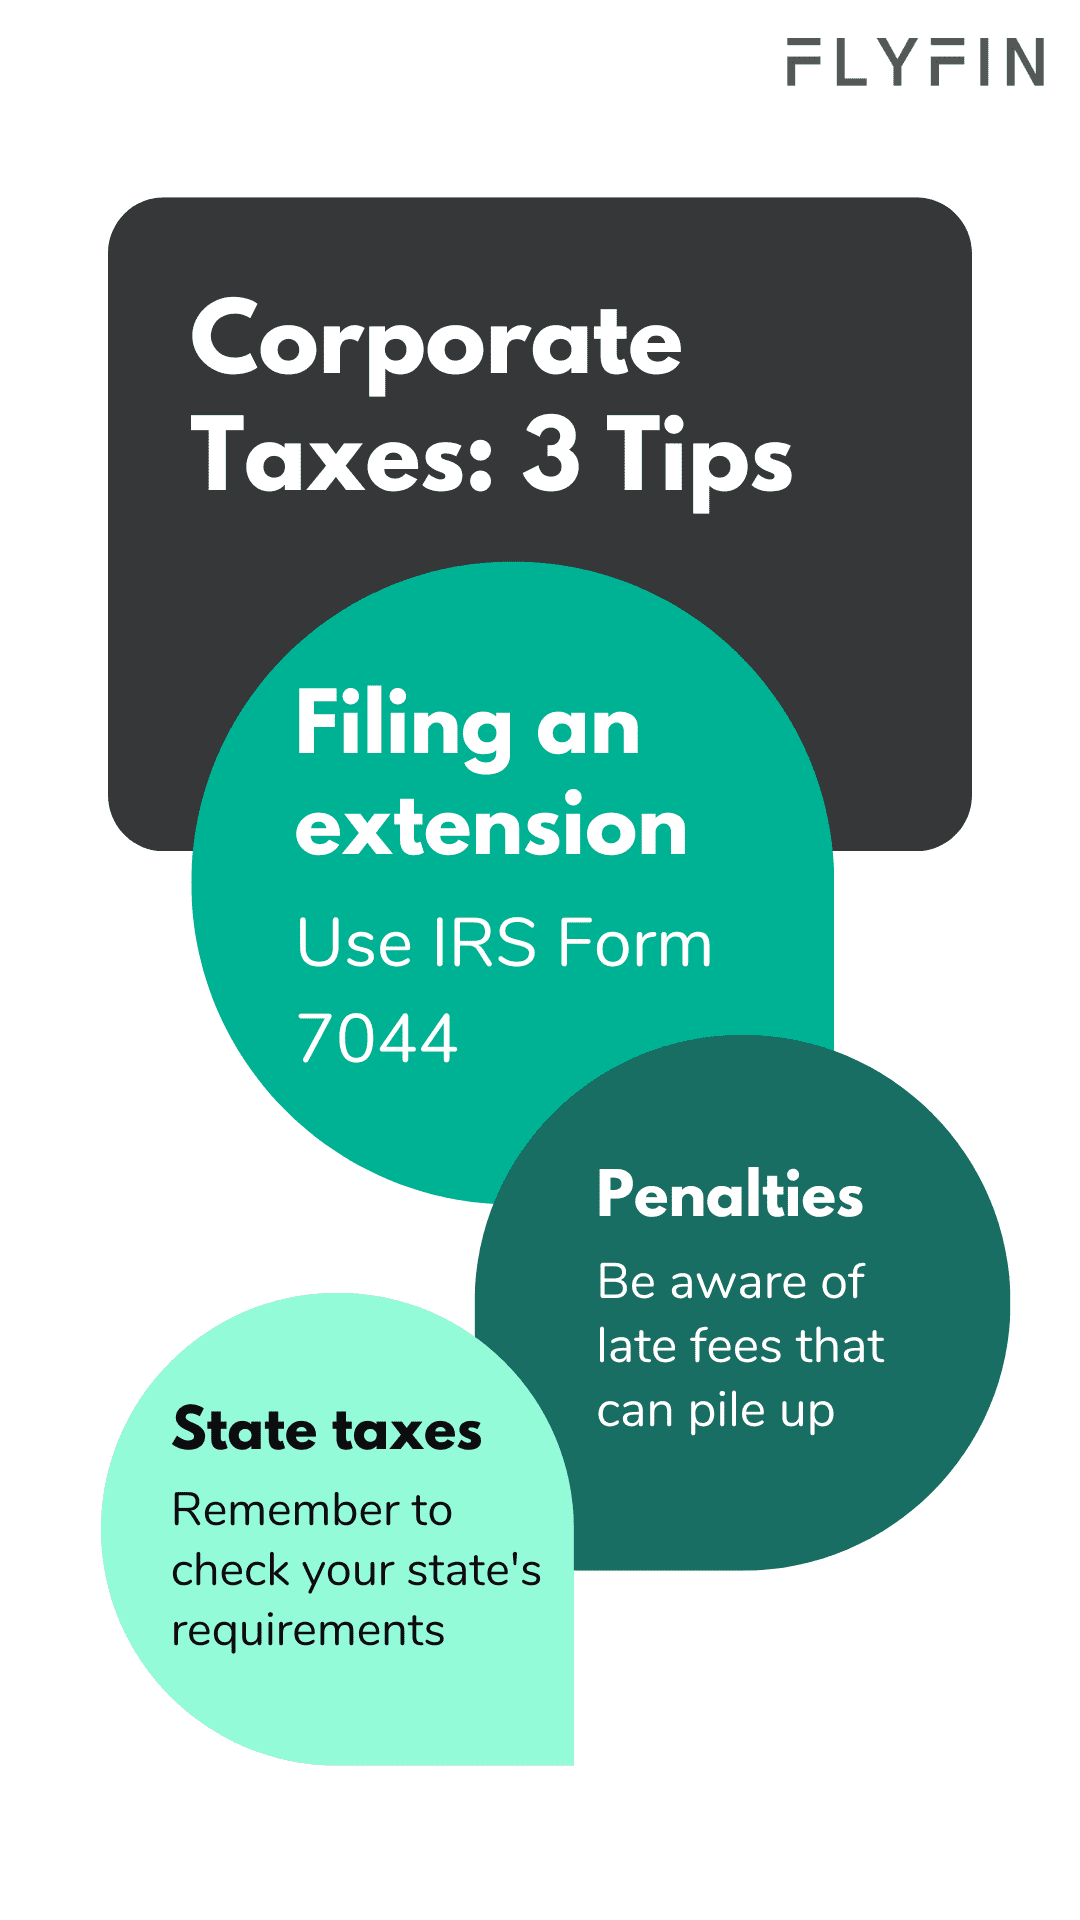 Tips for corporate taxes - filing extension with IRS Form 7044, avoiding penalties, and checking state requirements. Relevant for self-employed, 1099, and freelancers.